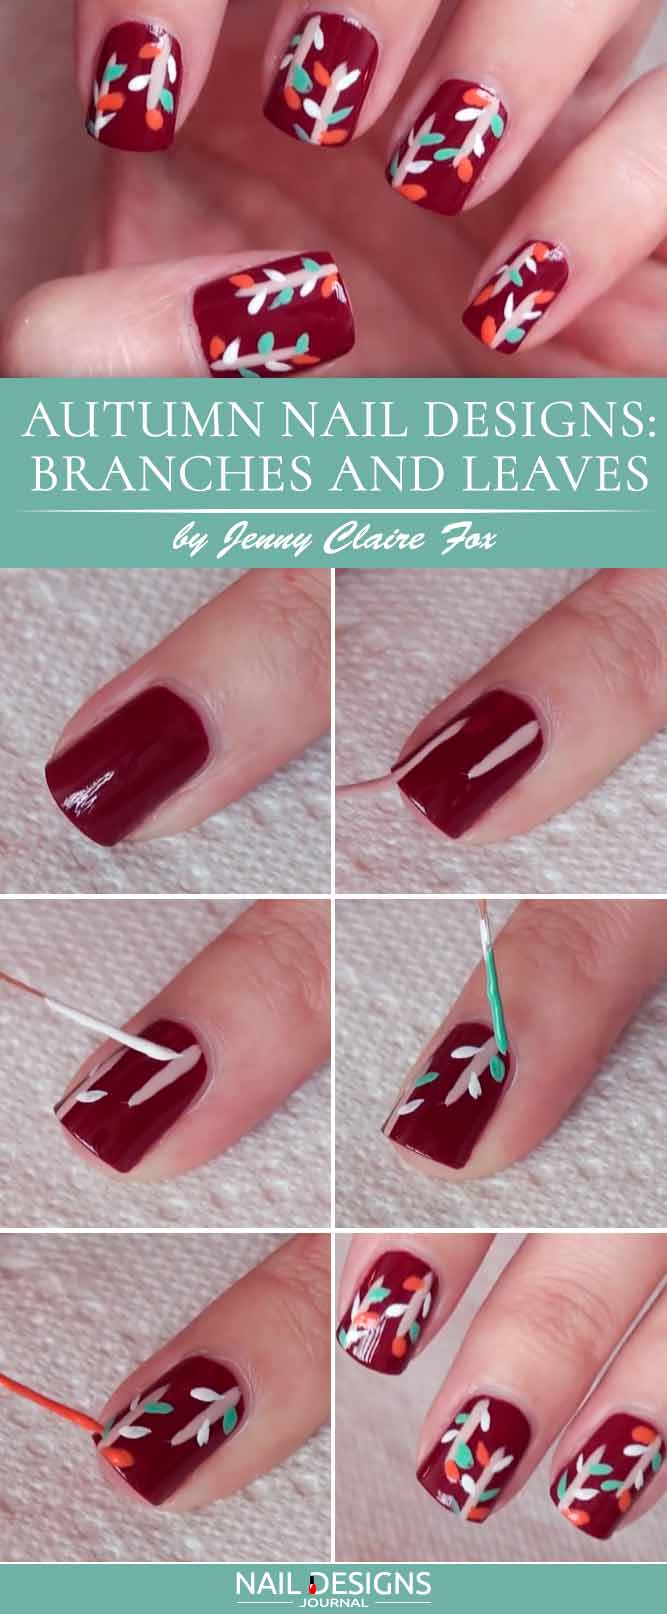 Autumn Nail Designs Branches and Leaves